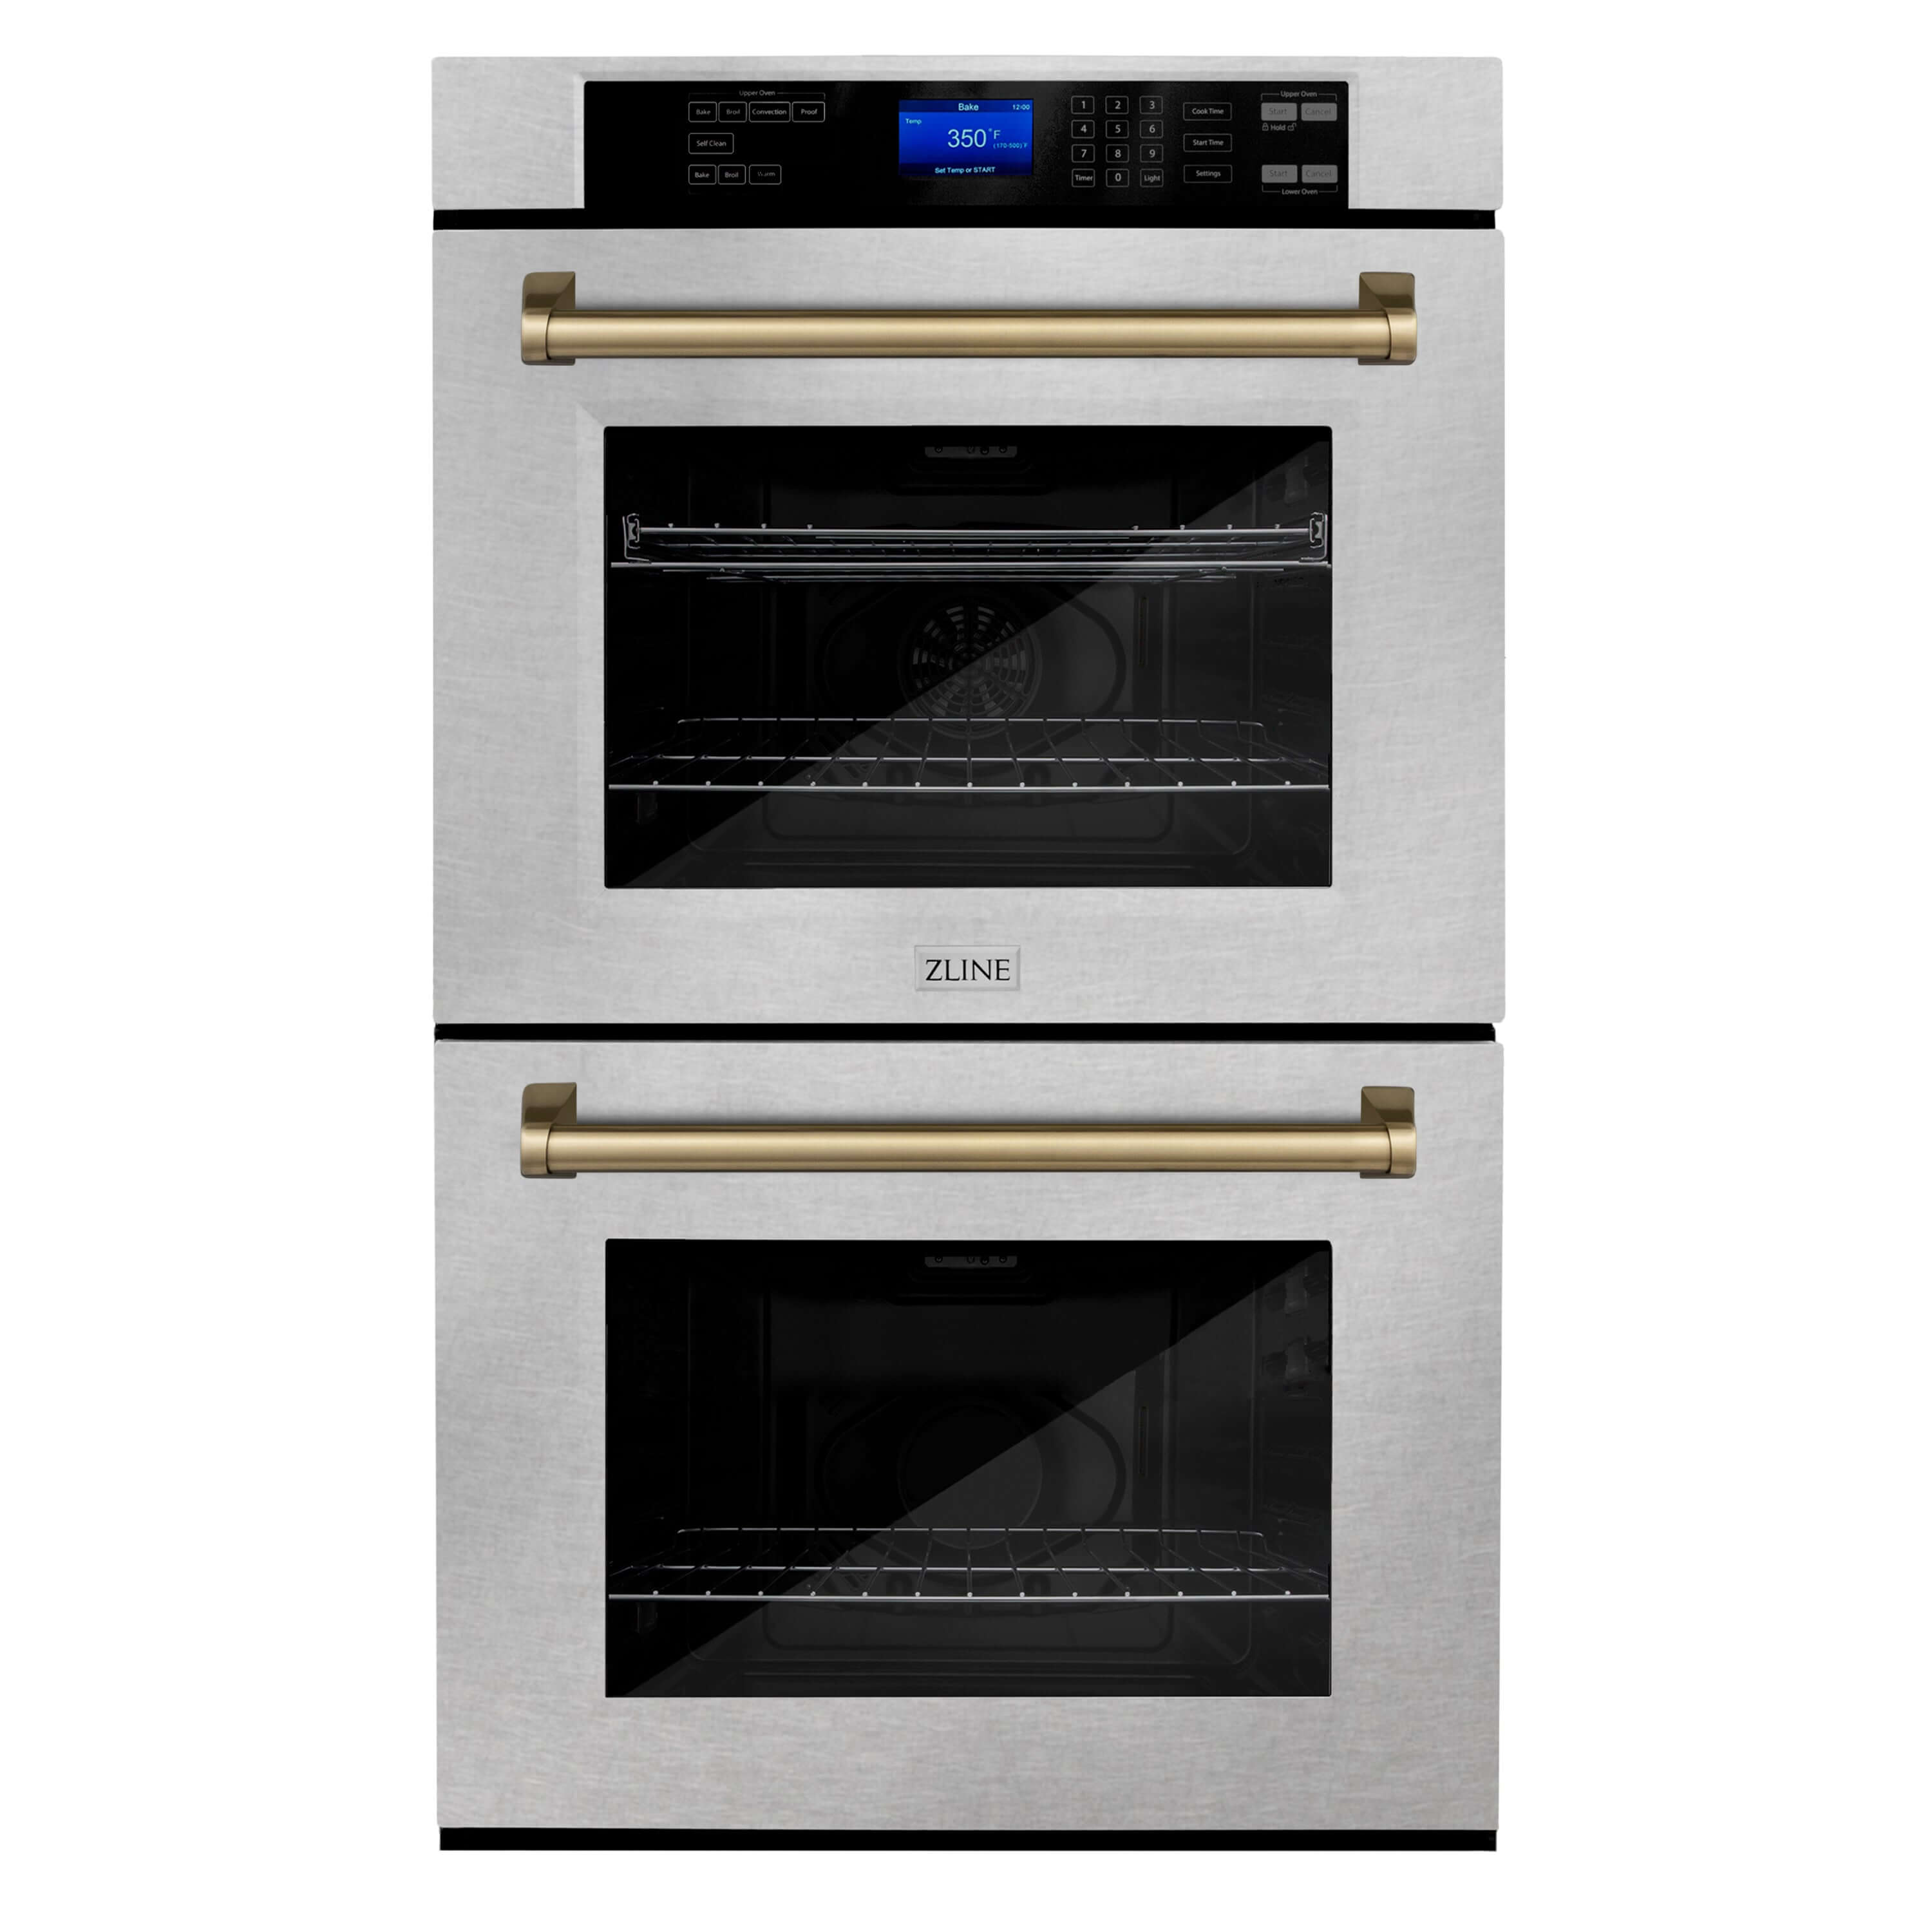 ZLINE Autograph Edition 30 in. Electric Double Wall Oven with Self Clean and True Convection in DuraSnow® Stainless Steel and Champagne Bronze Accents (AWDSZ-30-CB) front, oven closed.